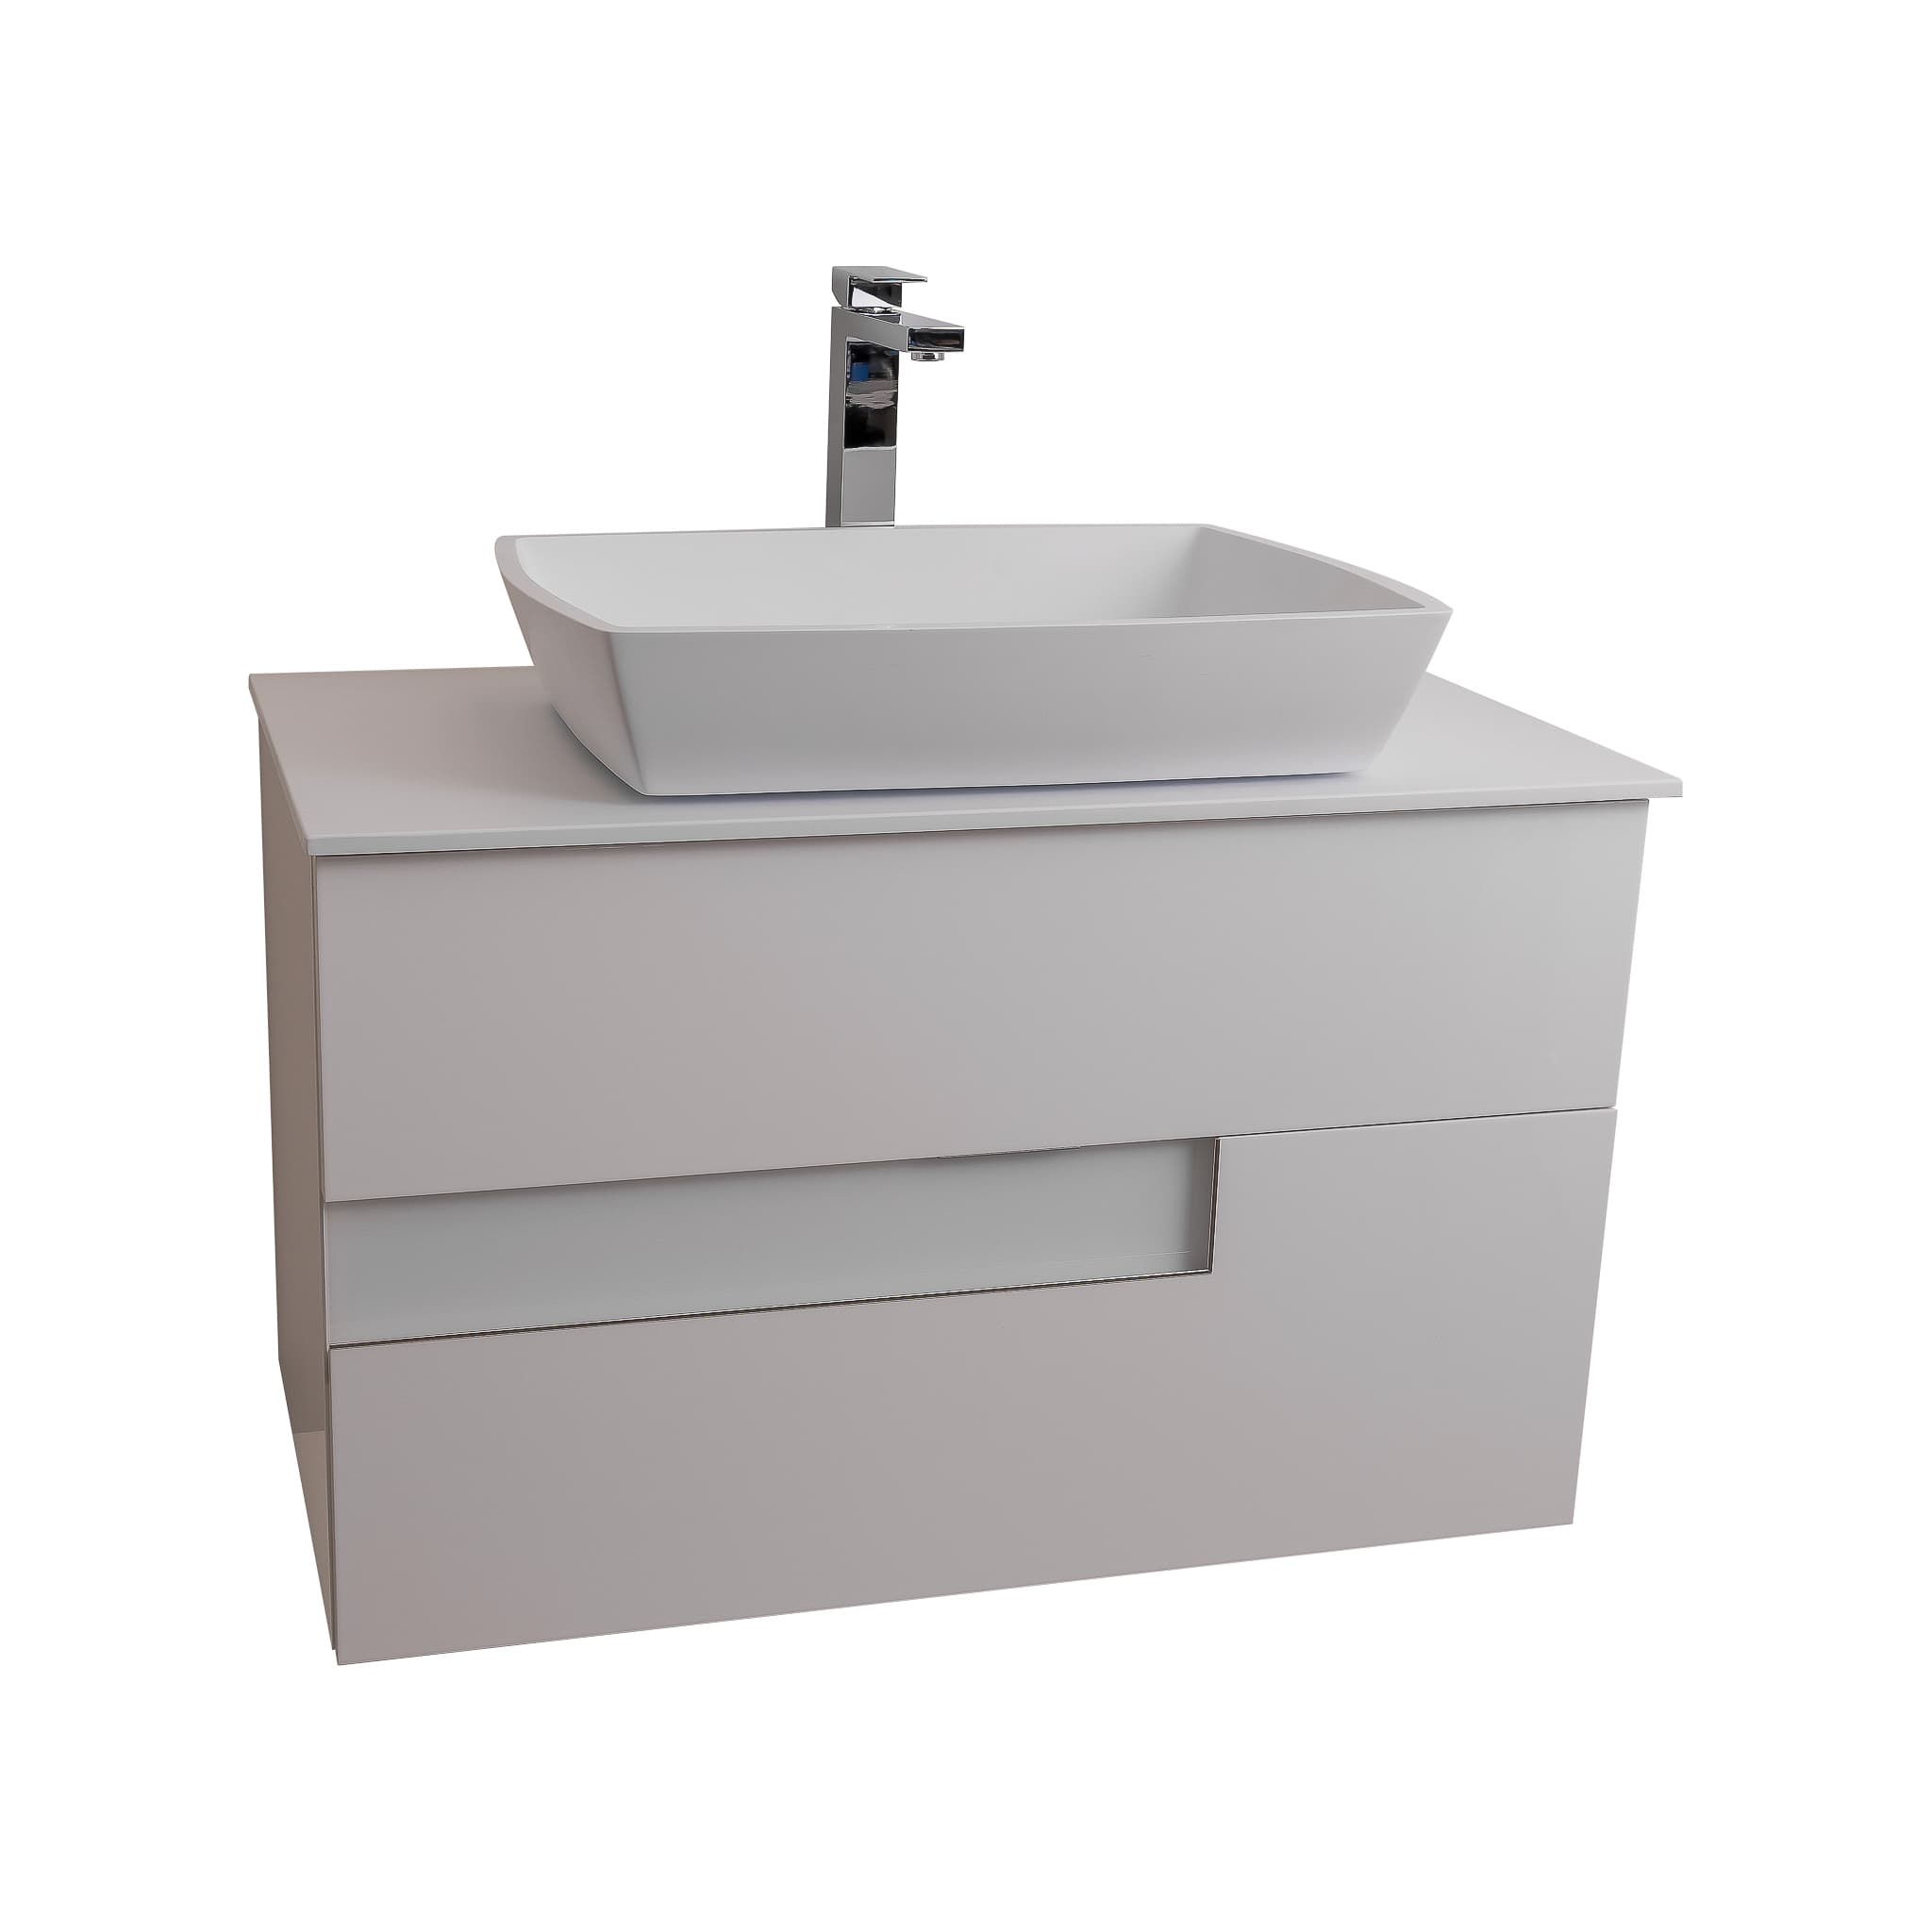 Vision 31.5 White High Gloss Cabinet, Solid Surface Flat White Counter And Square Solid Surface White Basin 1316, Wall Mounted Modern Vanity Set